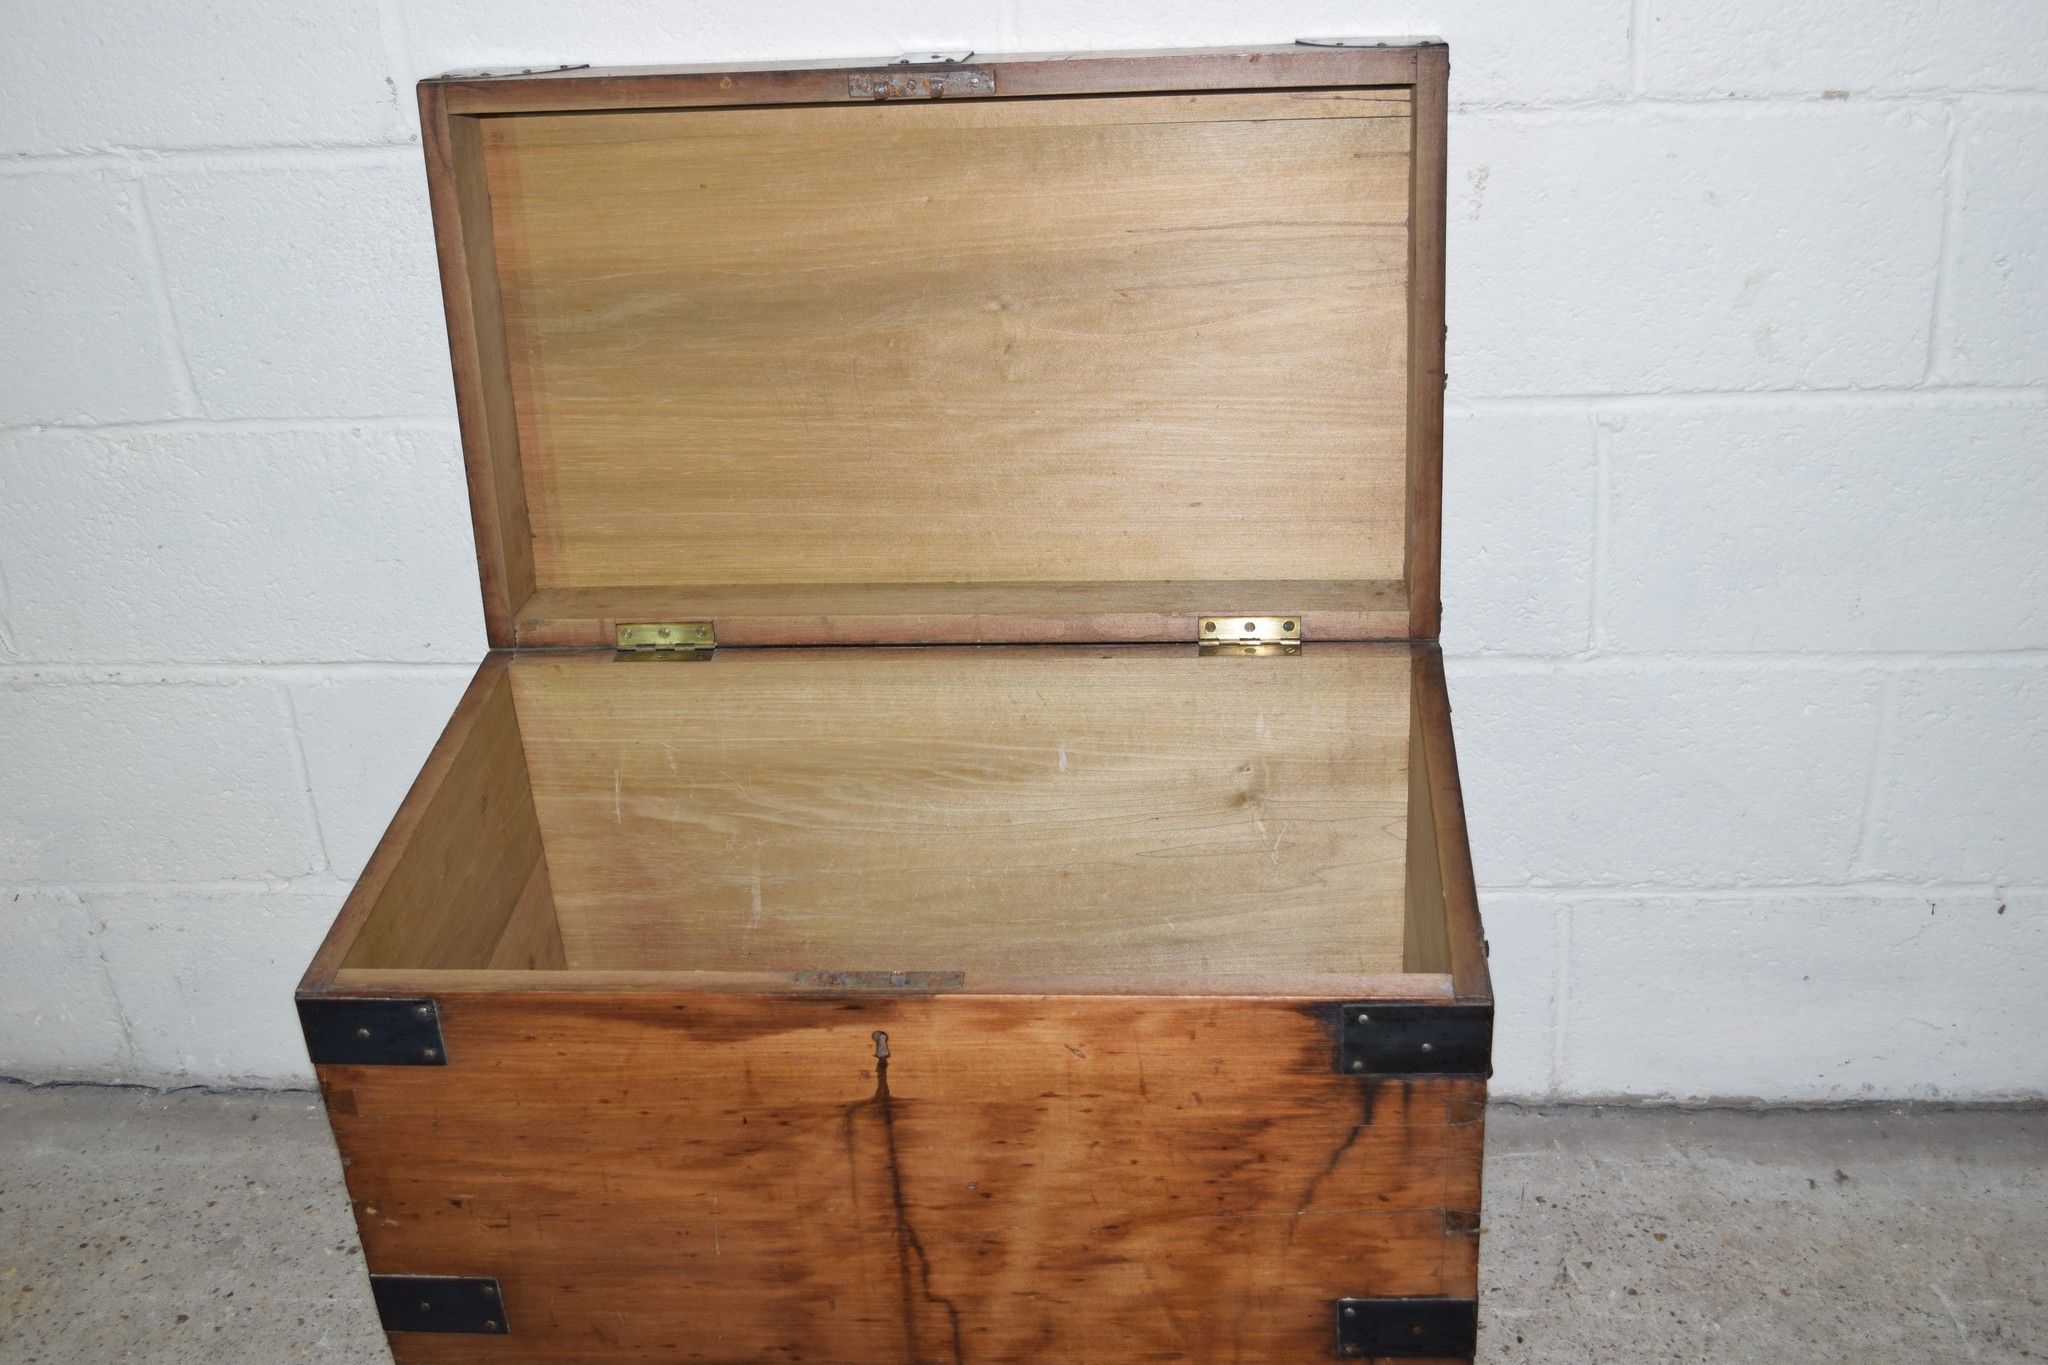 REPRODUCTION HARDWOOD STORAGE CHEST WITH METAL TRIM, APPROX LENGTH 74CM - Image 3 of 3